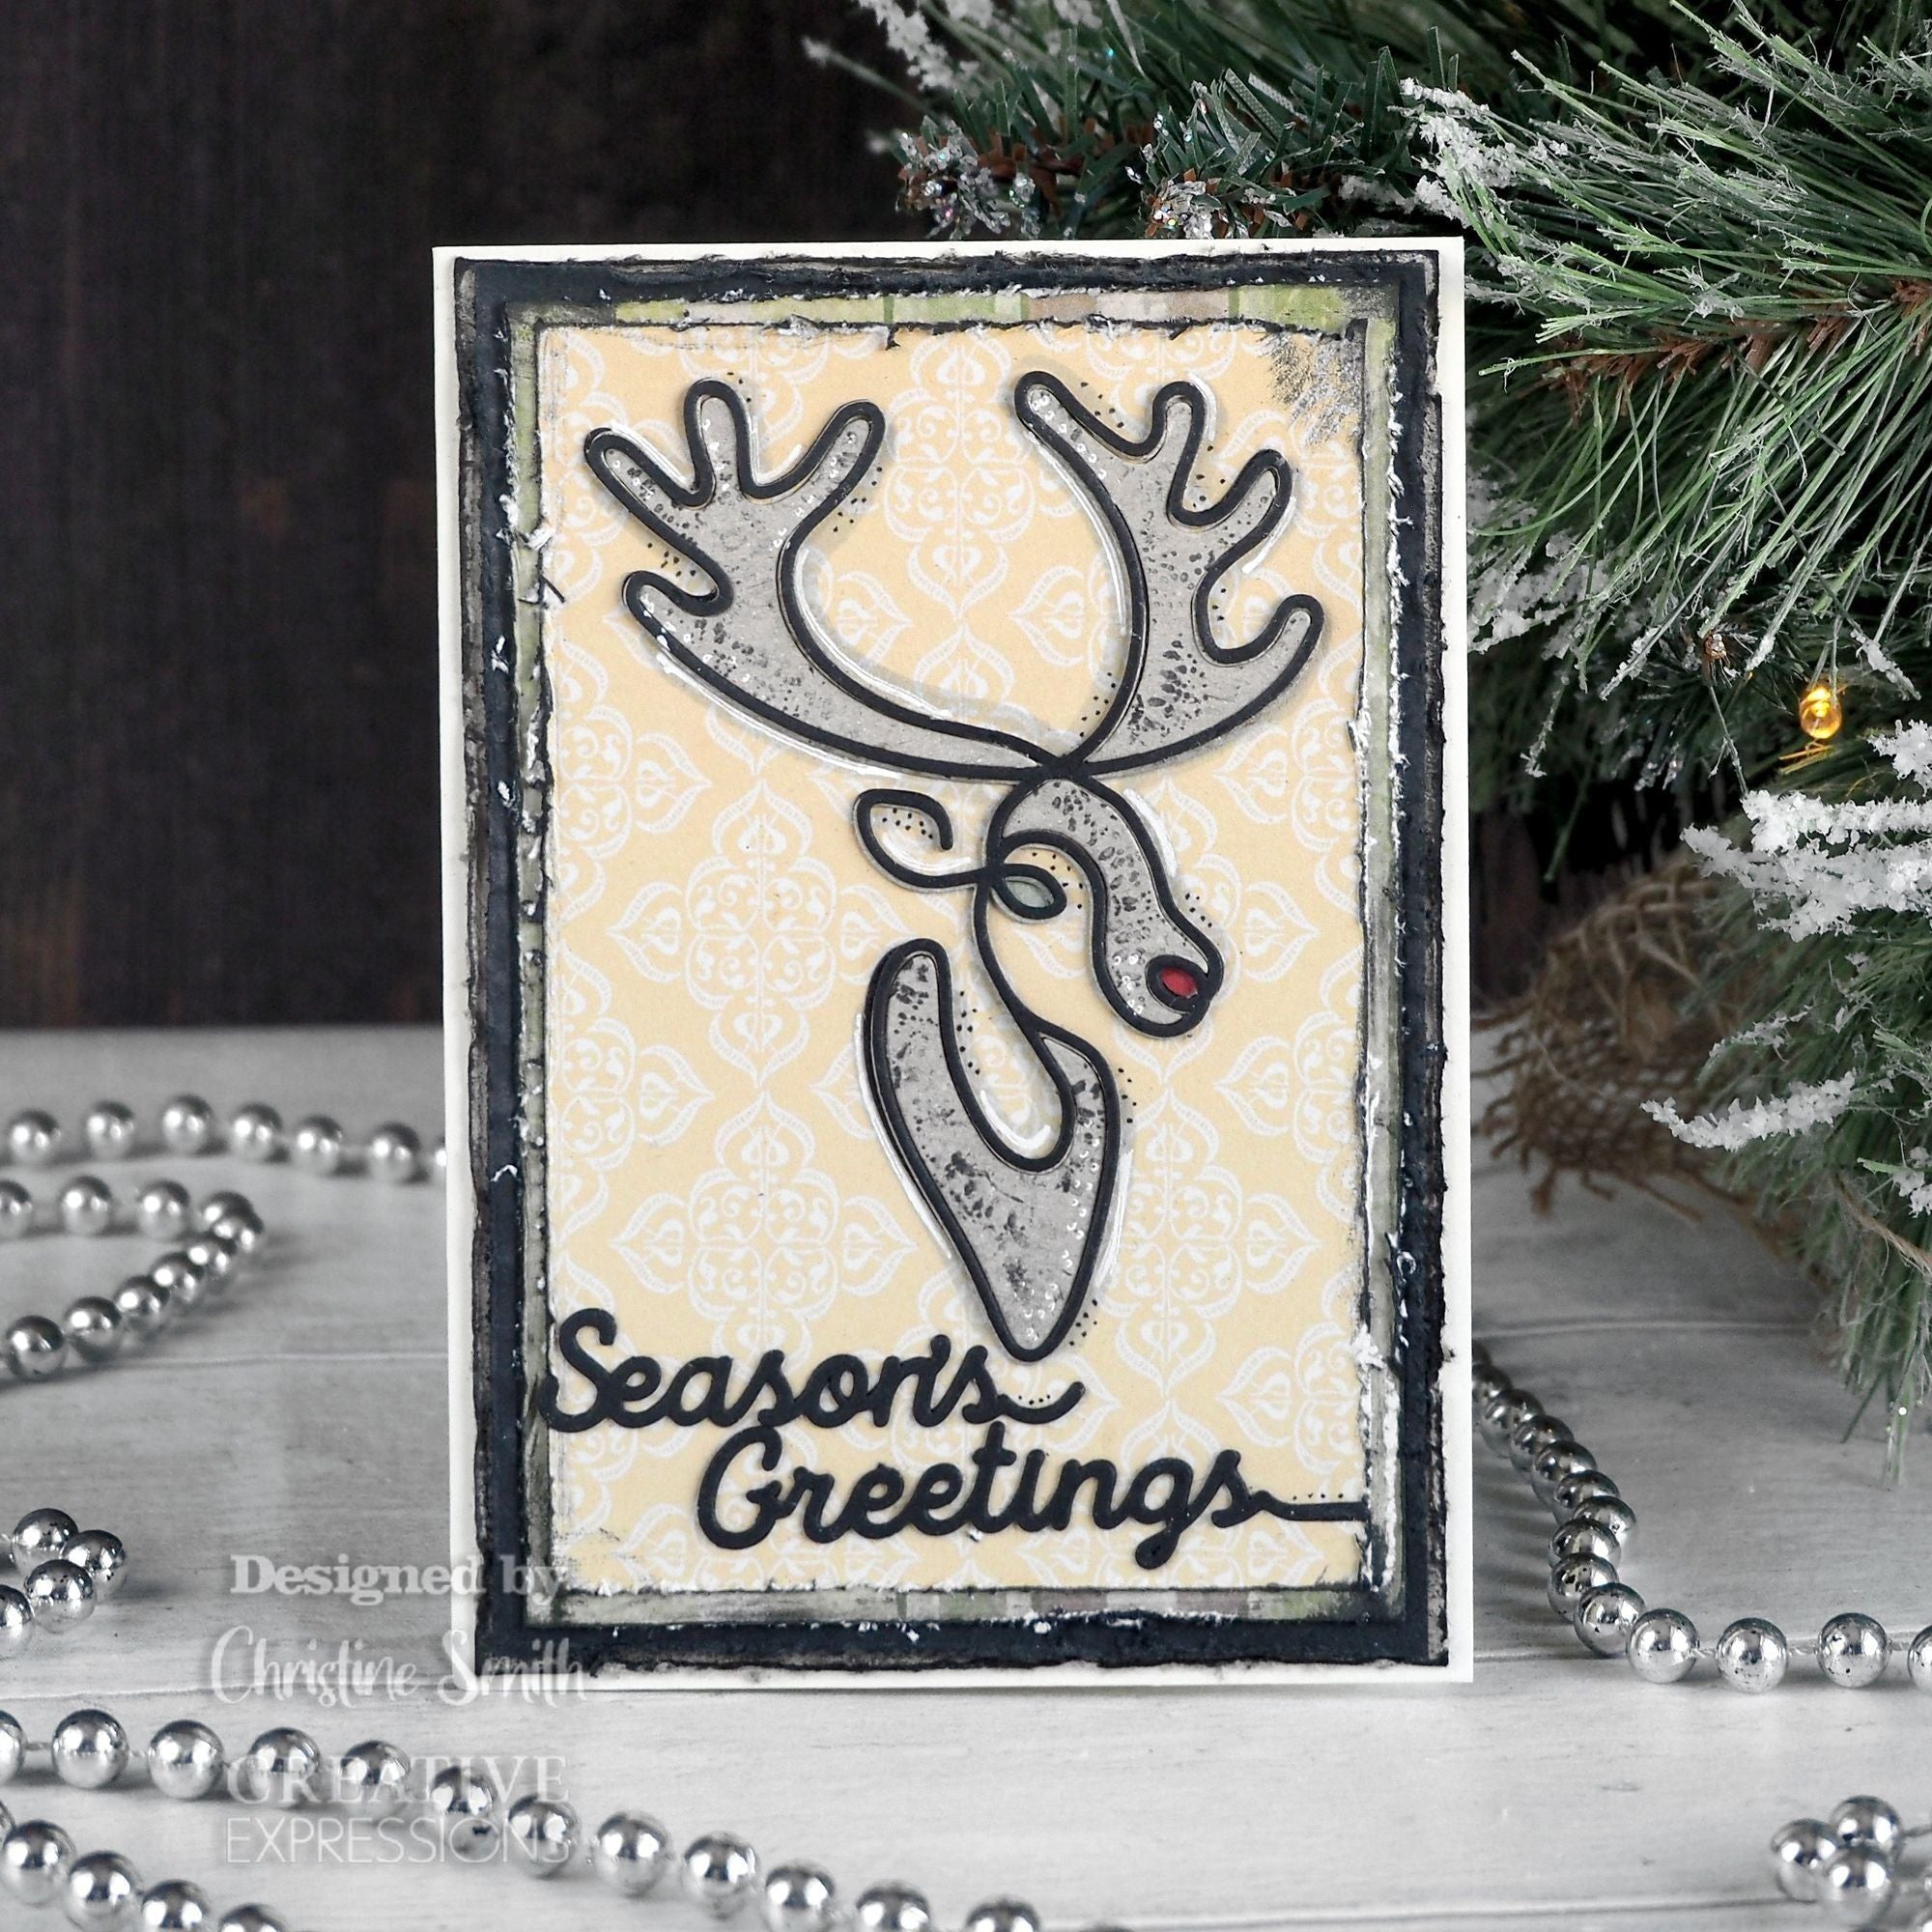 Creative Expressions One-liner Collection Stag's Head Craft Die